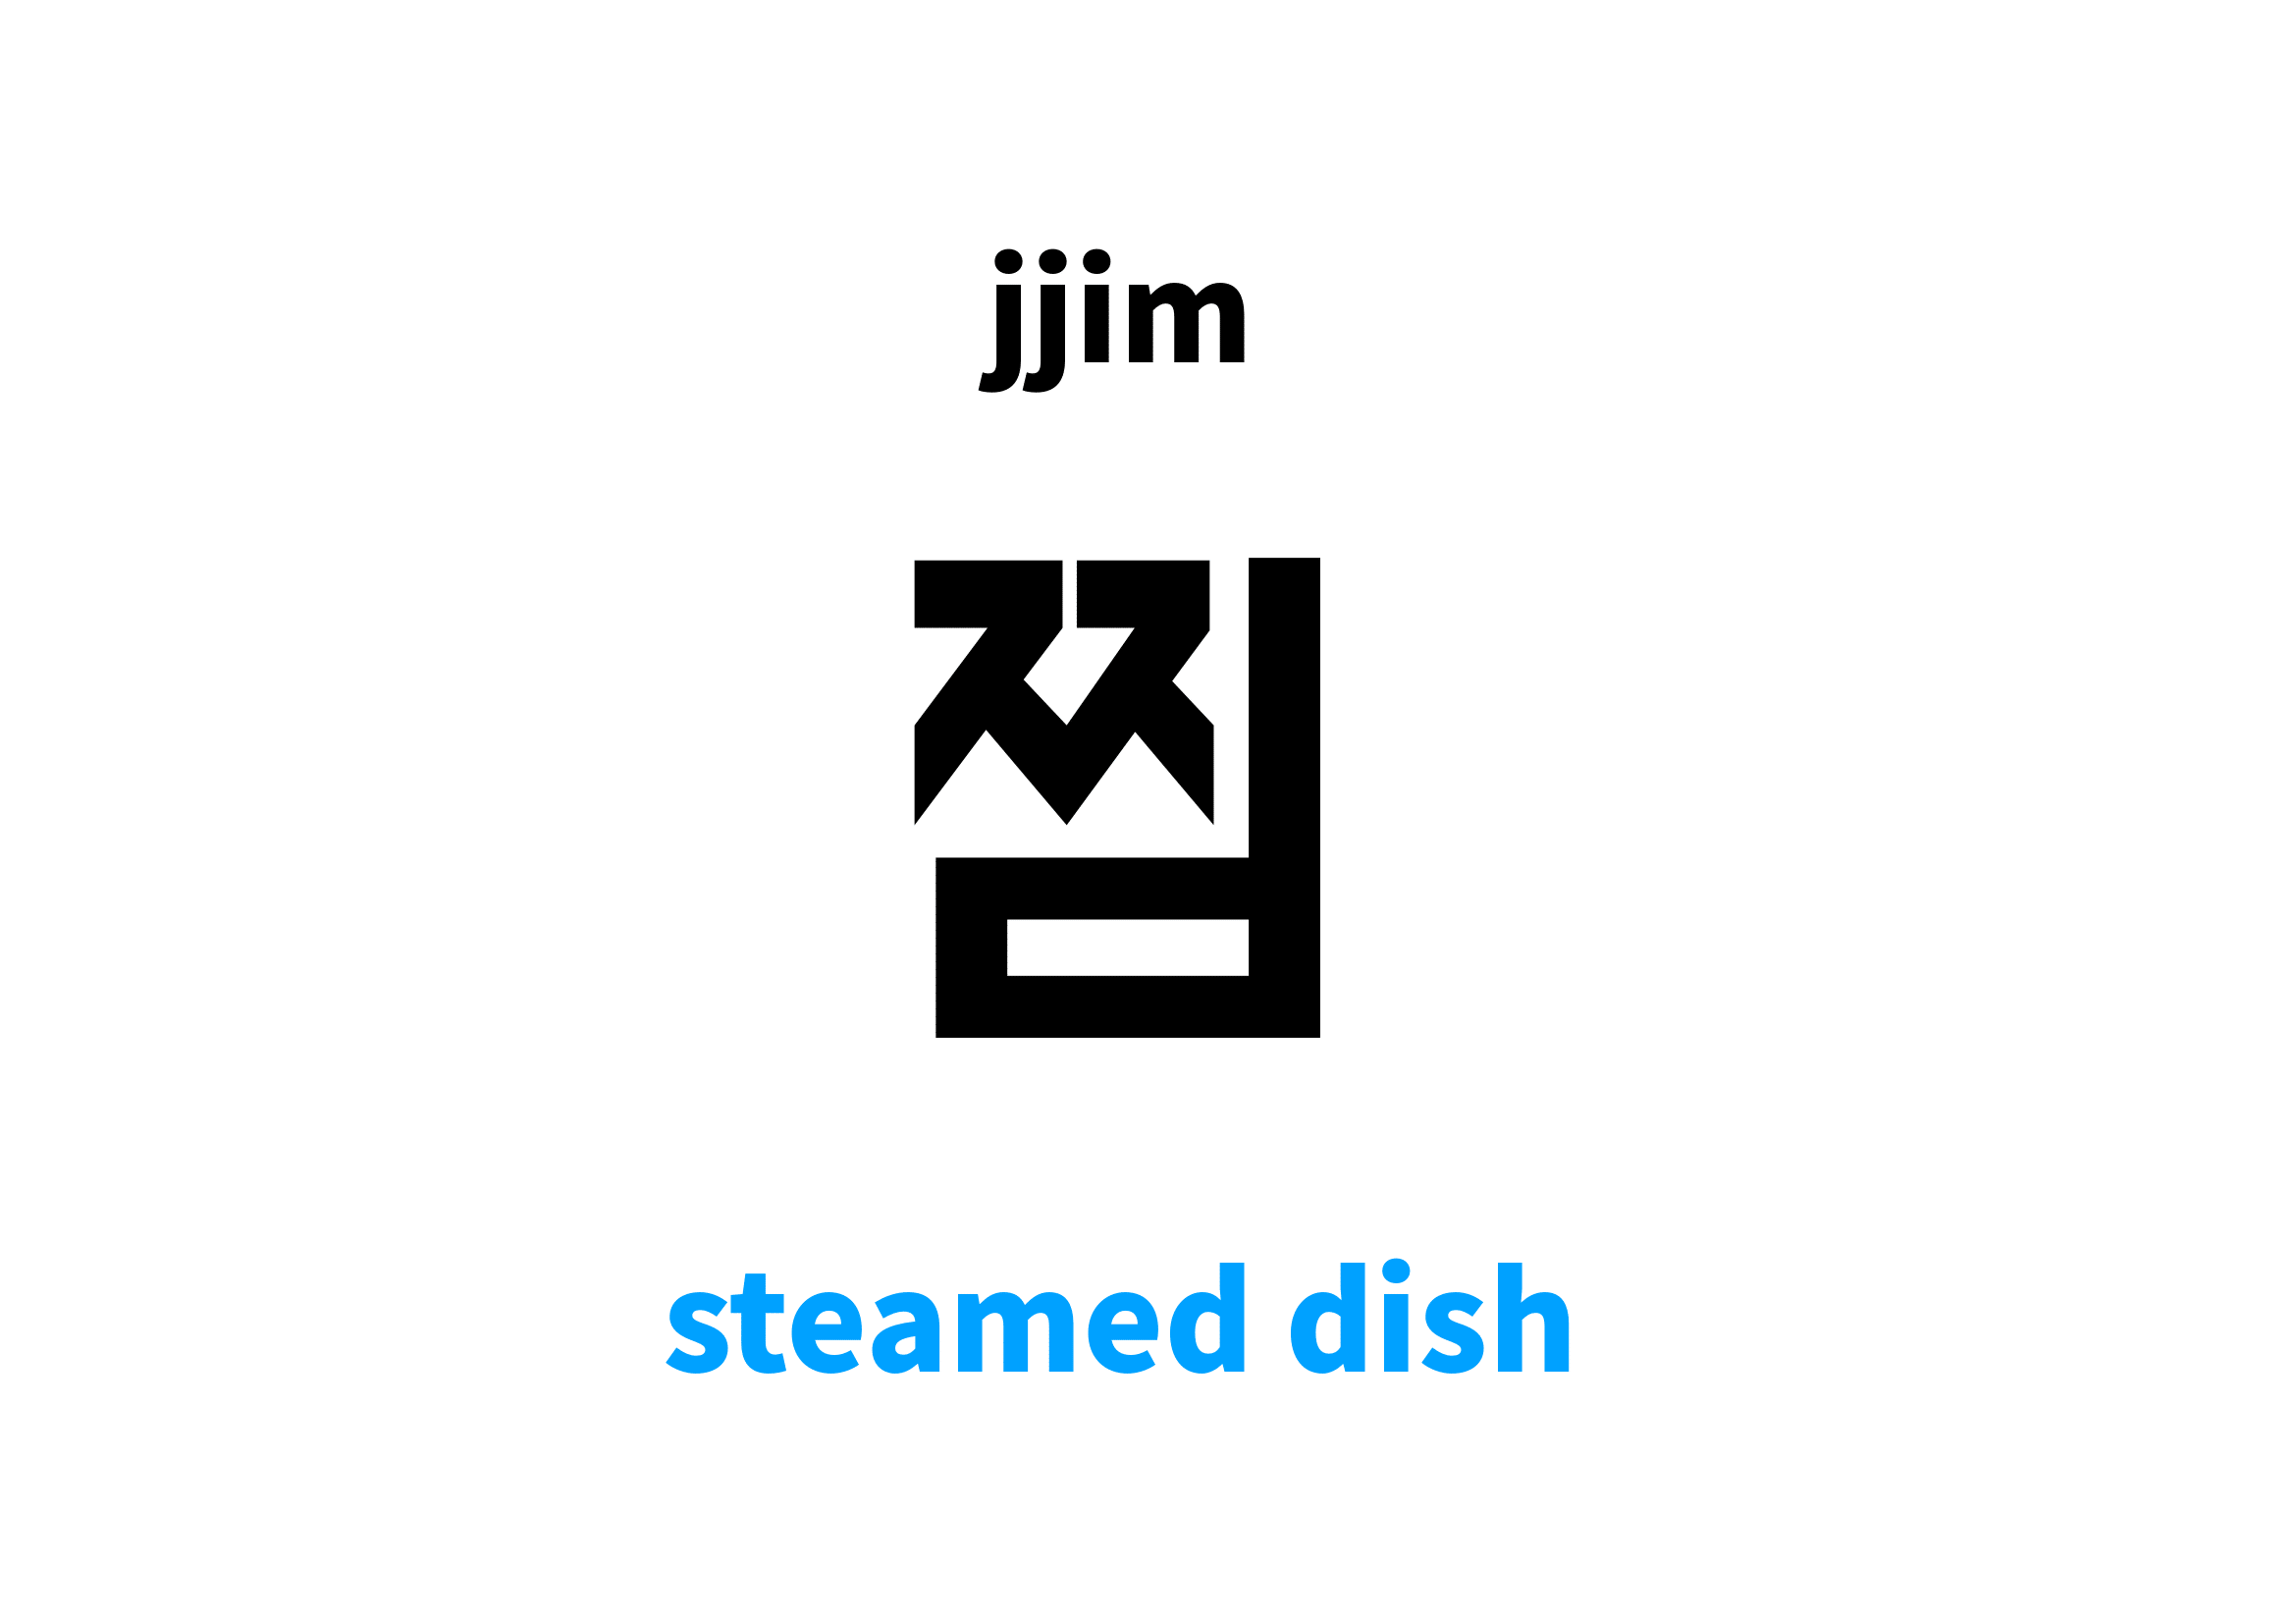 steamed dish in Korean, 찜 meaning